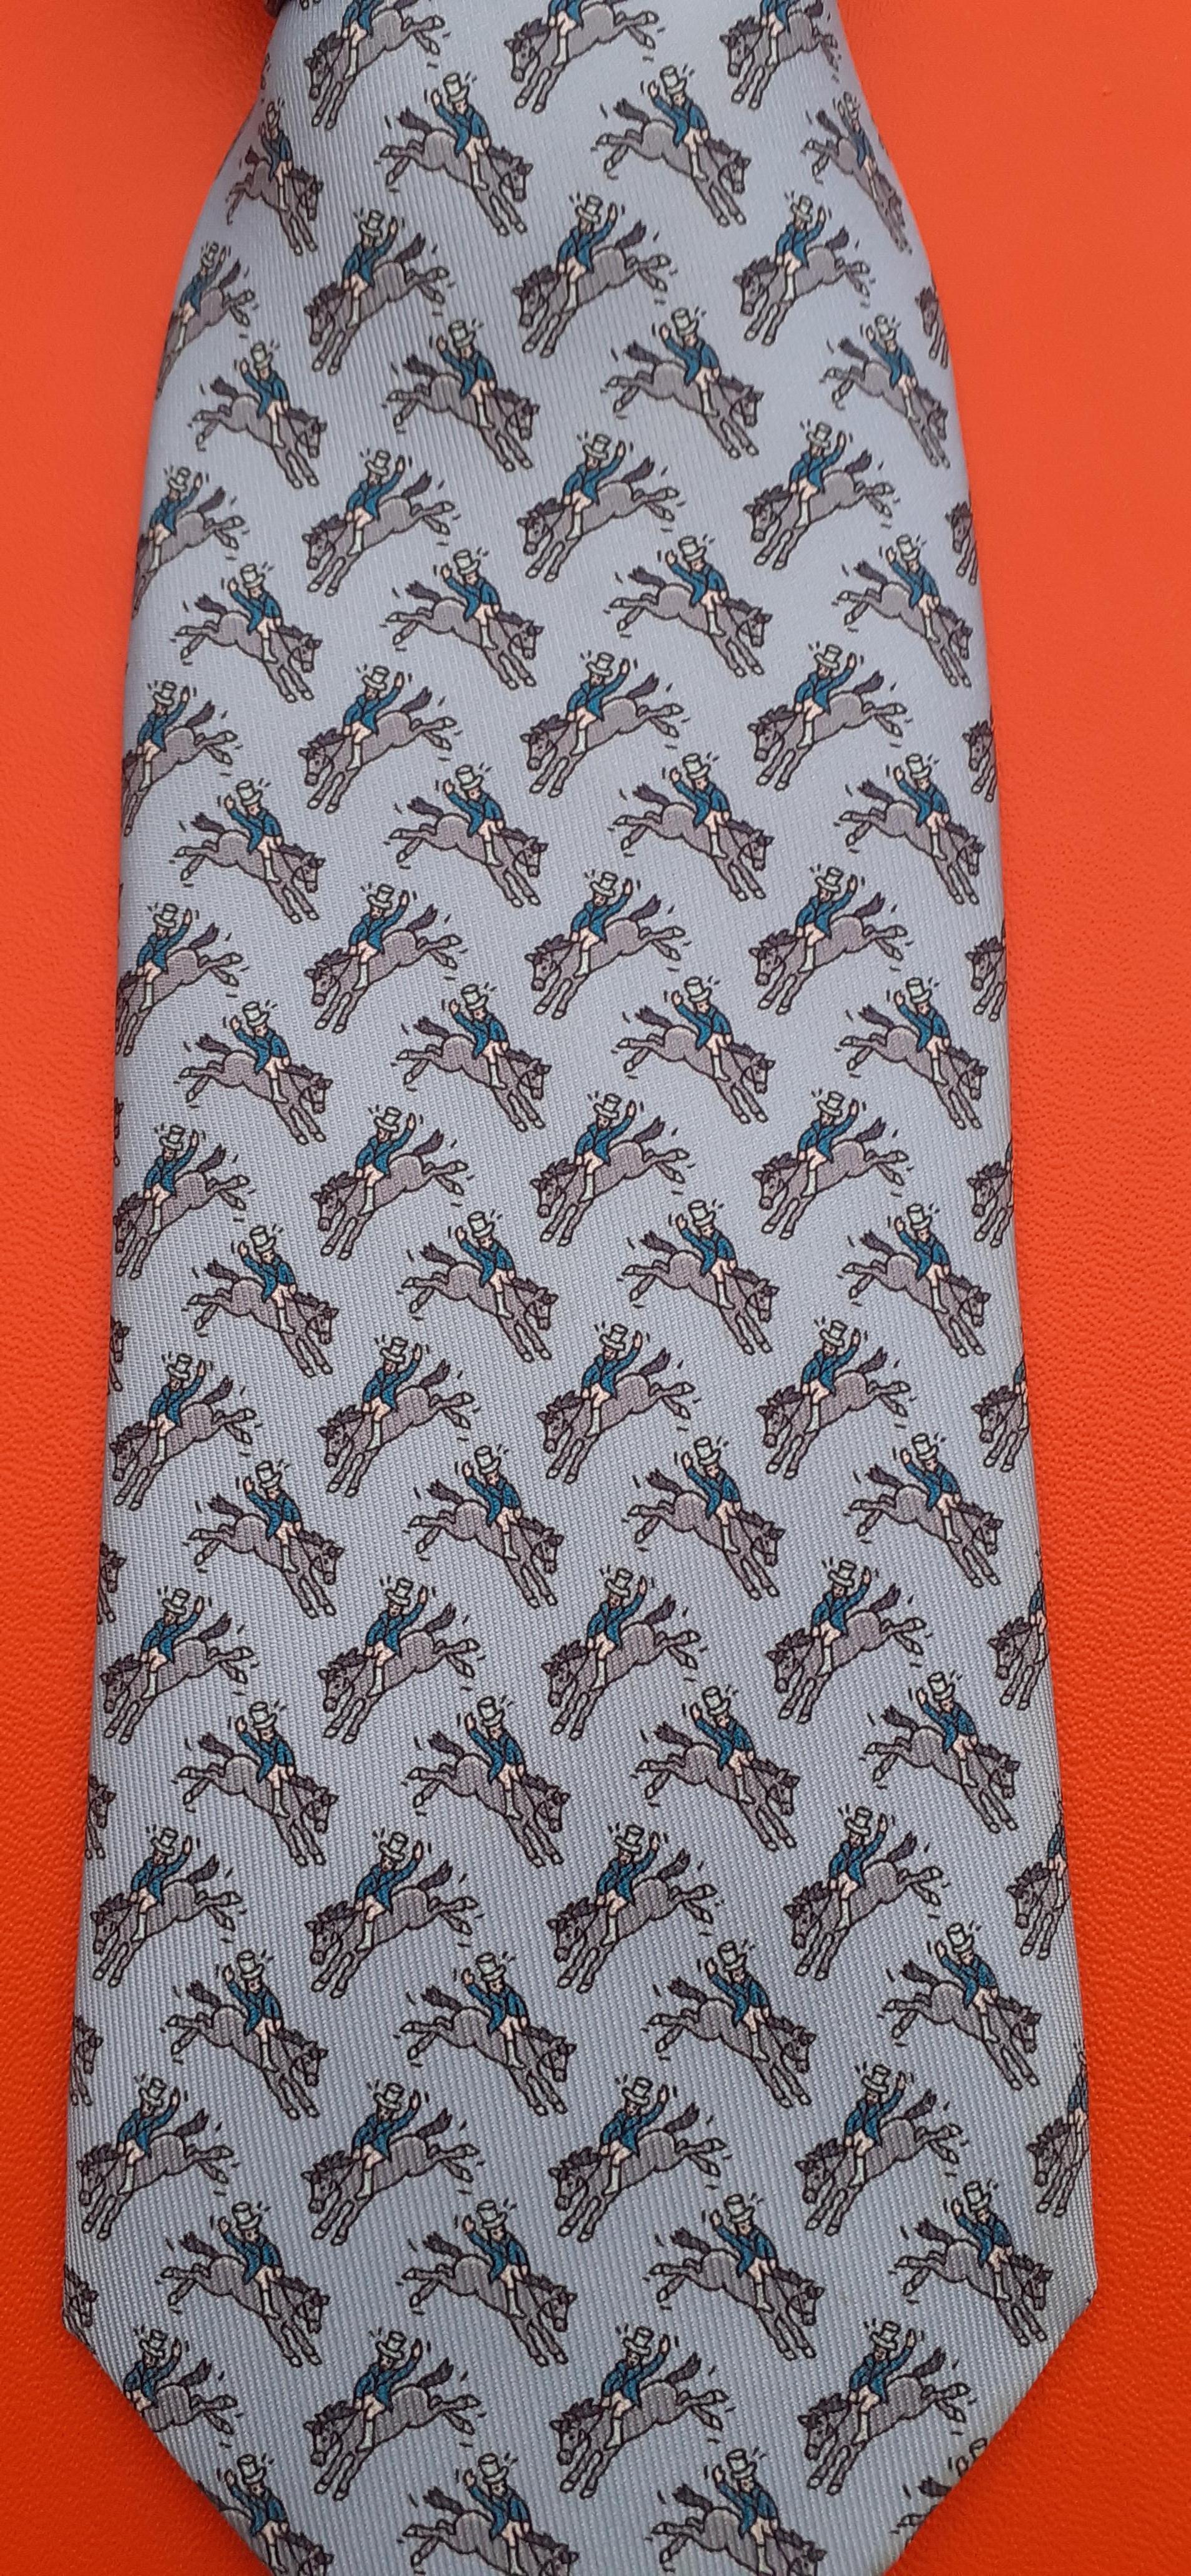 Beautiful Authentic Hermès Tie

Print: Rodeo

Made in France

Made of 100% Silk

Colorways: shades of blue

Lined with plain blue silk

